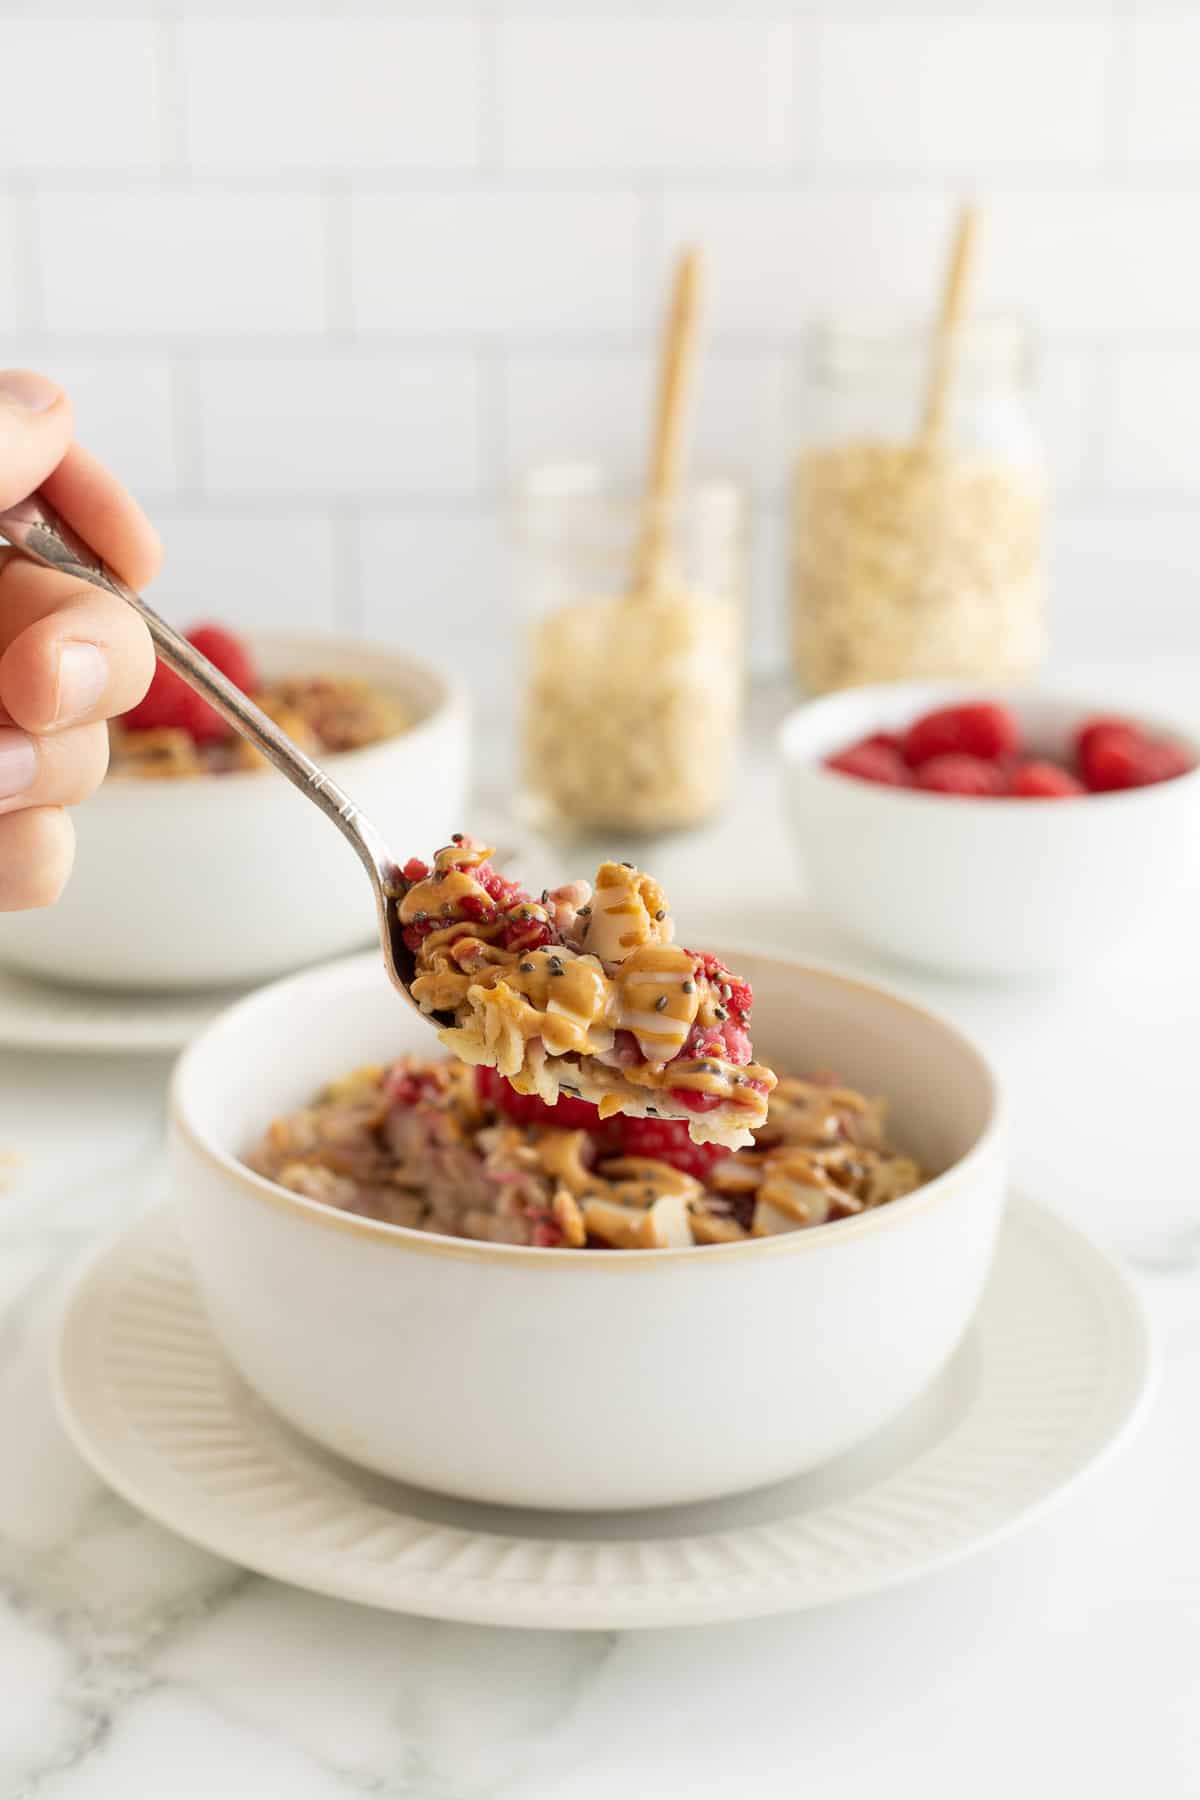 A spoon lifting a scoop of oatmeal with raspberries, peanut butter, and almonds.